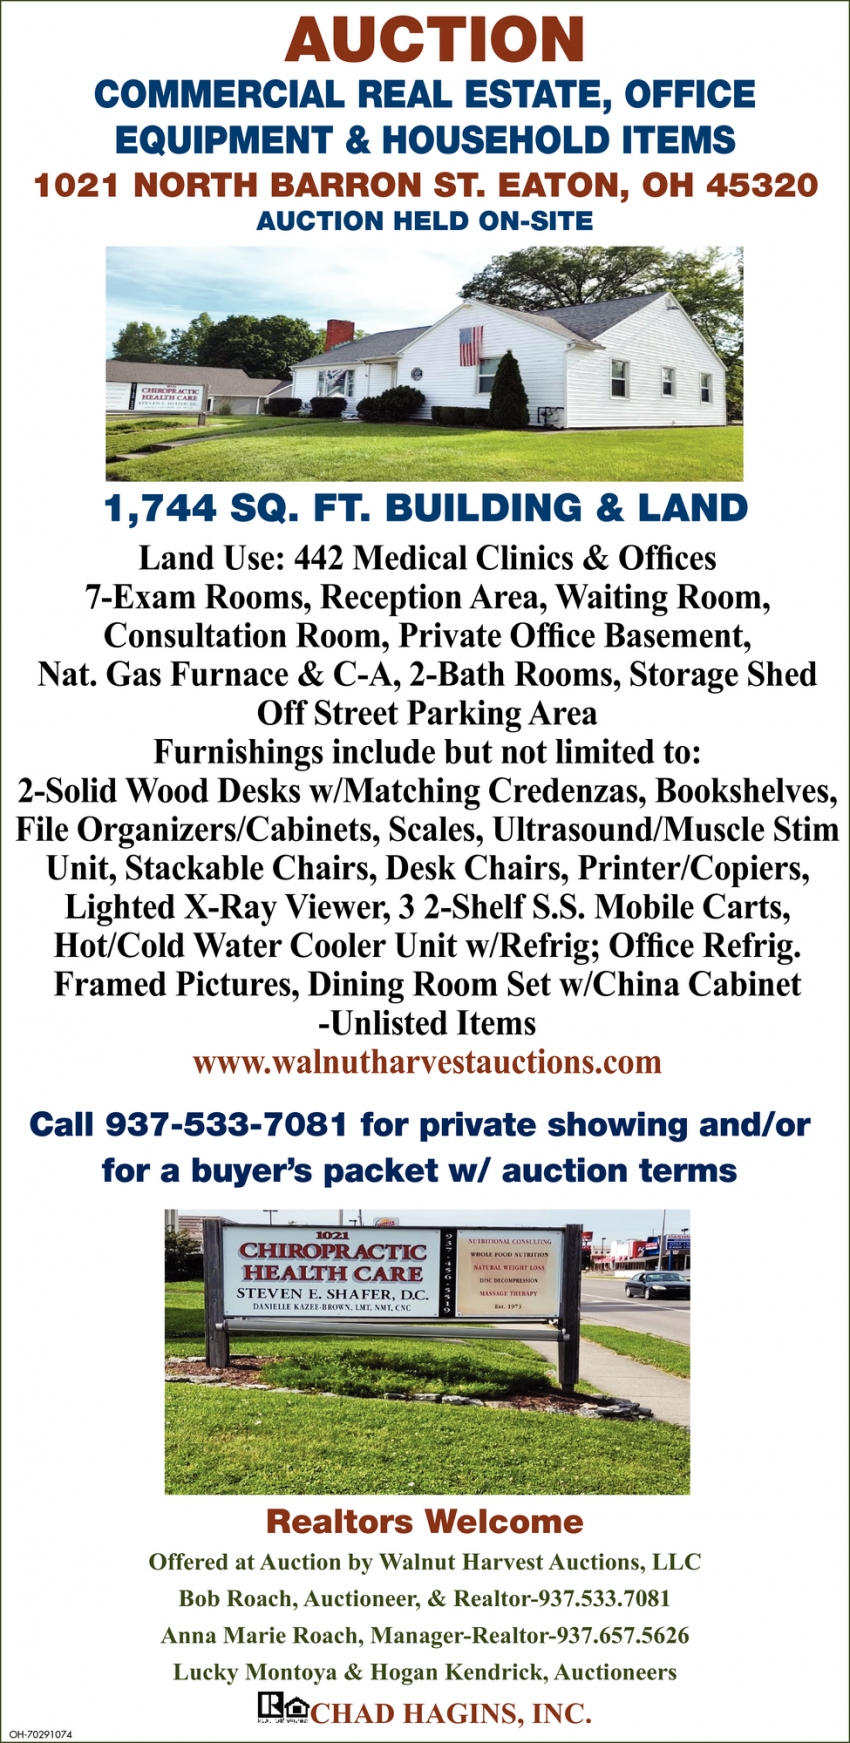 Auction Commercial Real Estate